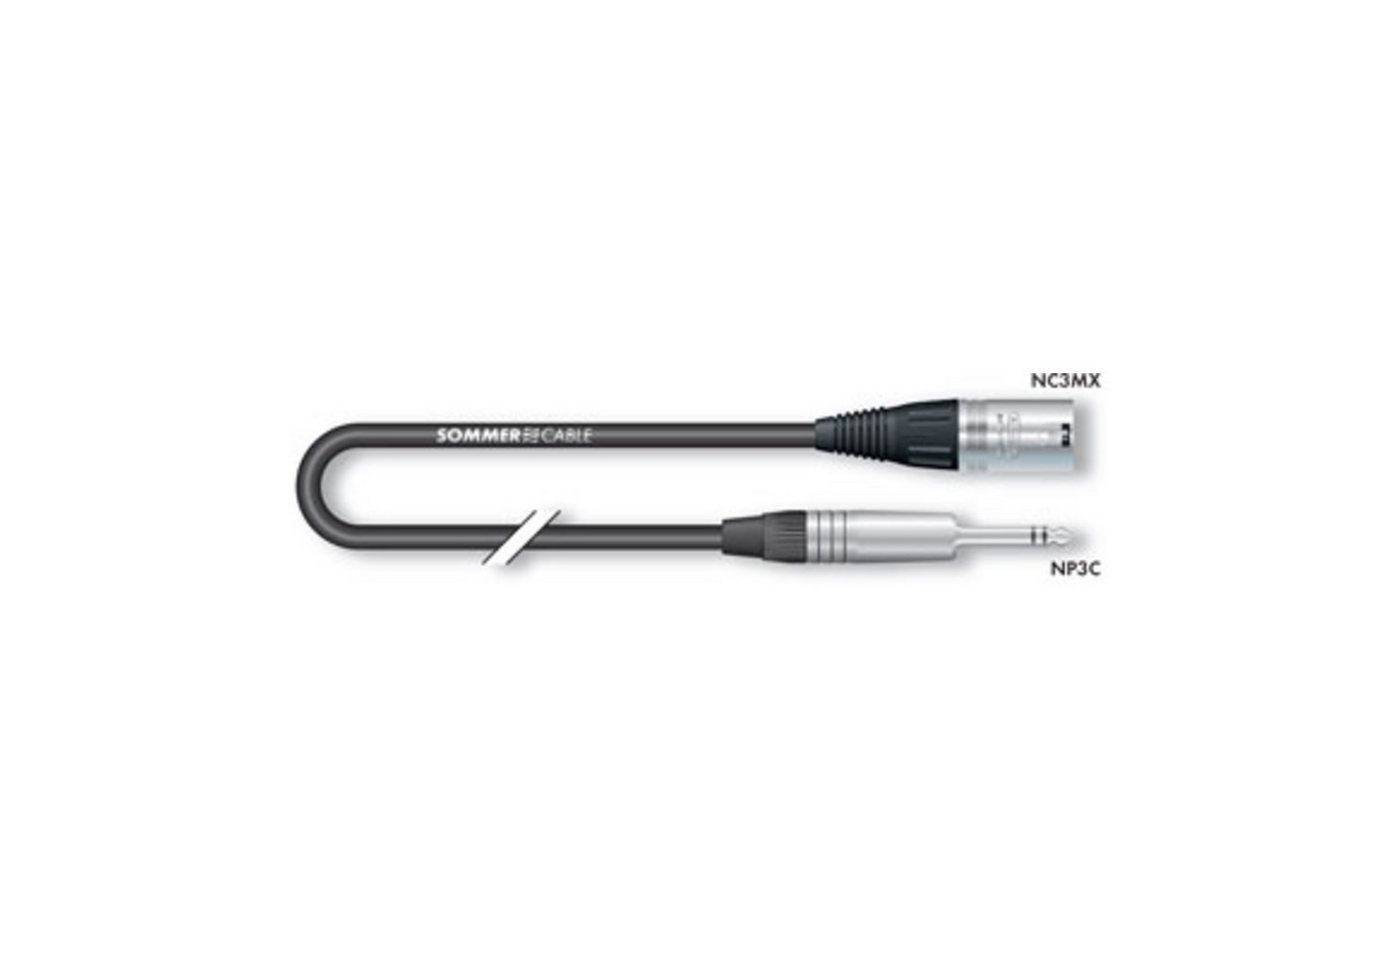 Sommer Cable Audio-Kabel, SG04-1000-SW Stage 22 Mikrofonkabel 10 m - Mikrofonkabel von Sommer Cable